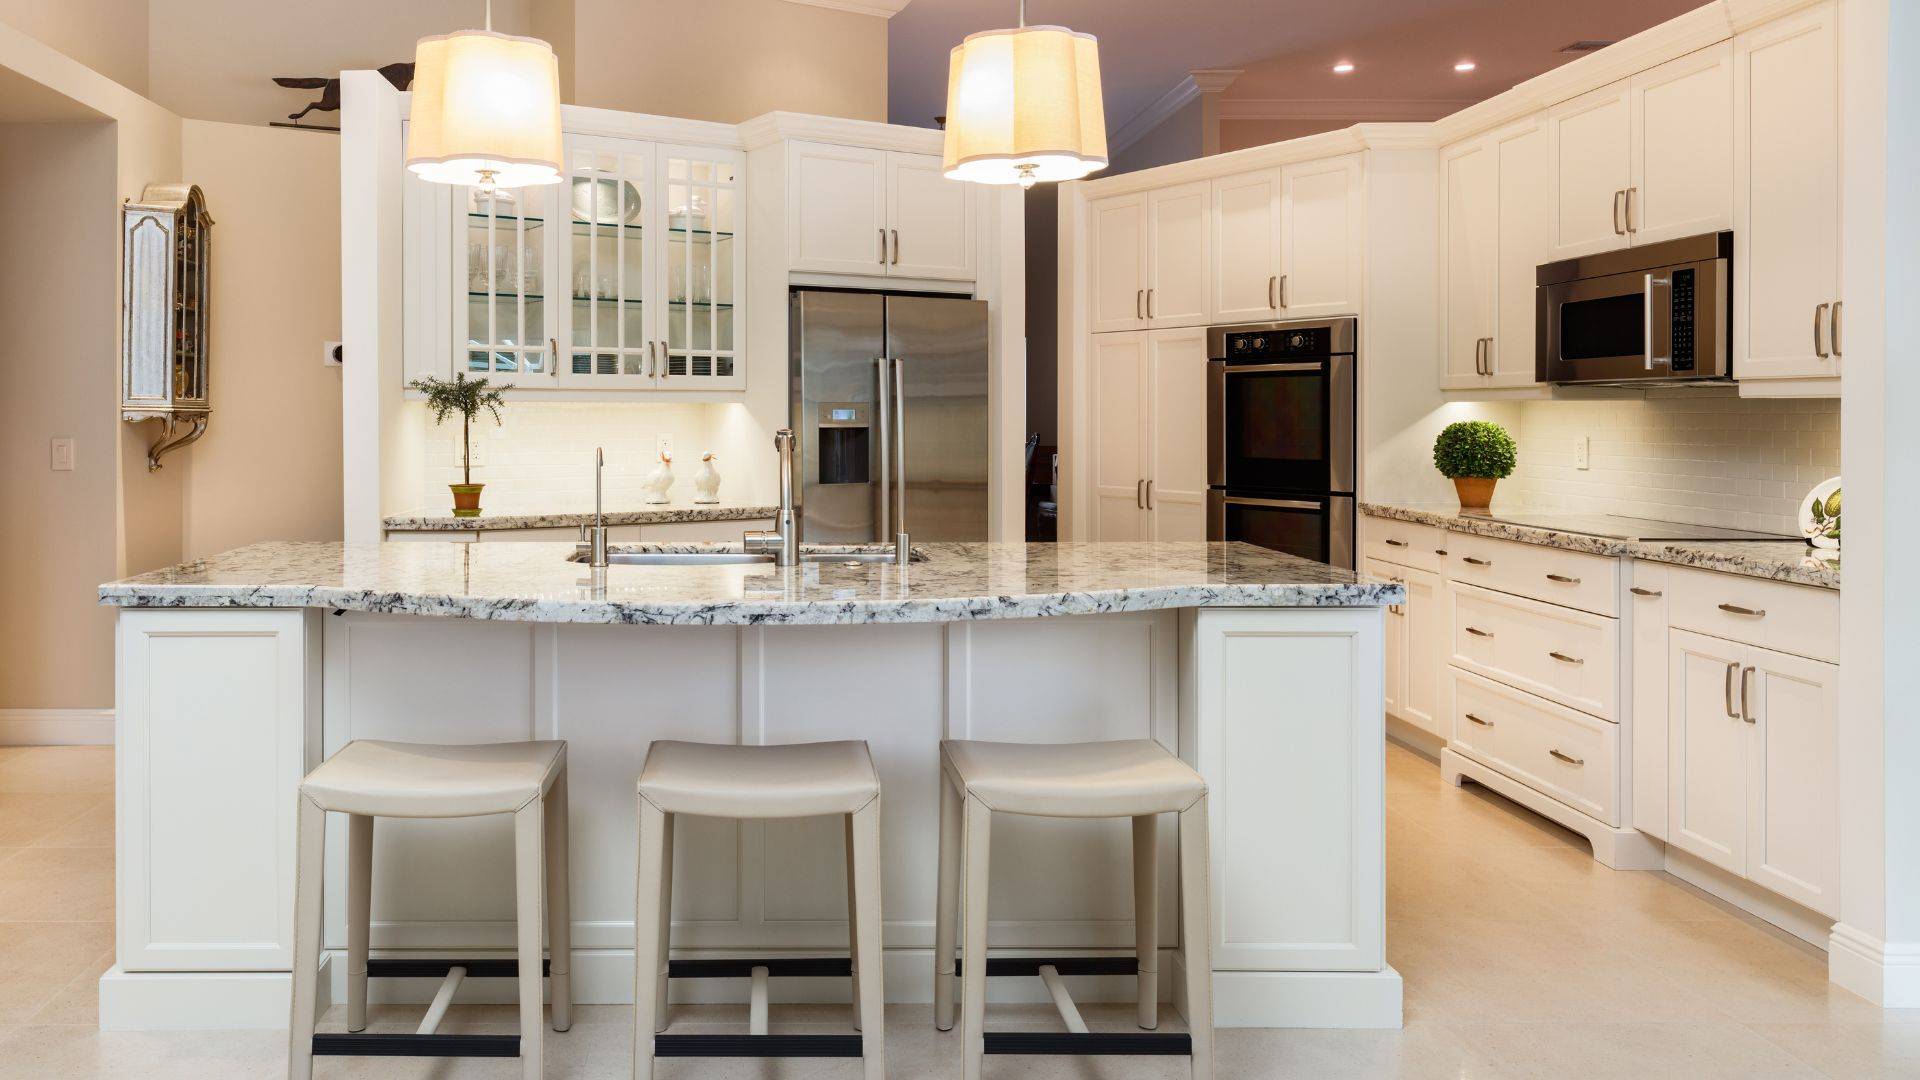 A modern kitchen with white cabinets and marble countertops.